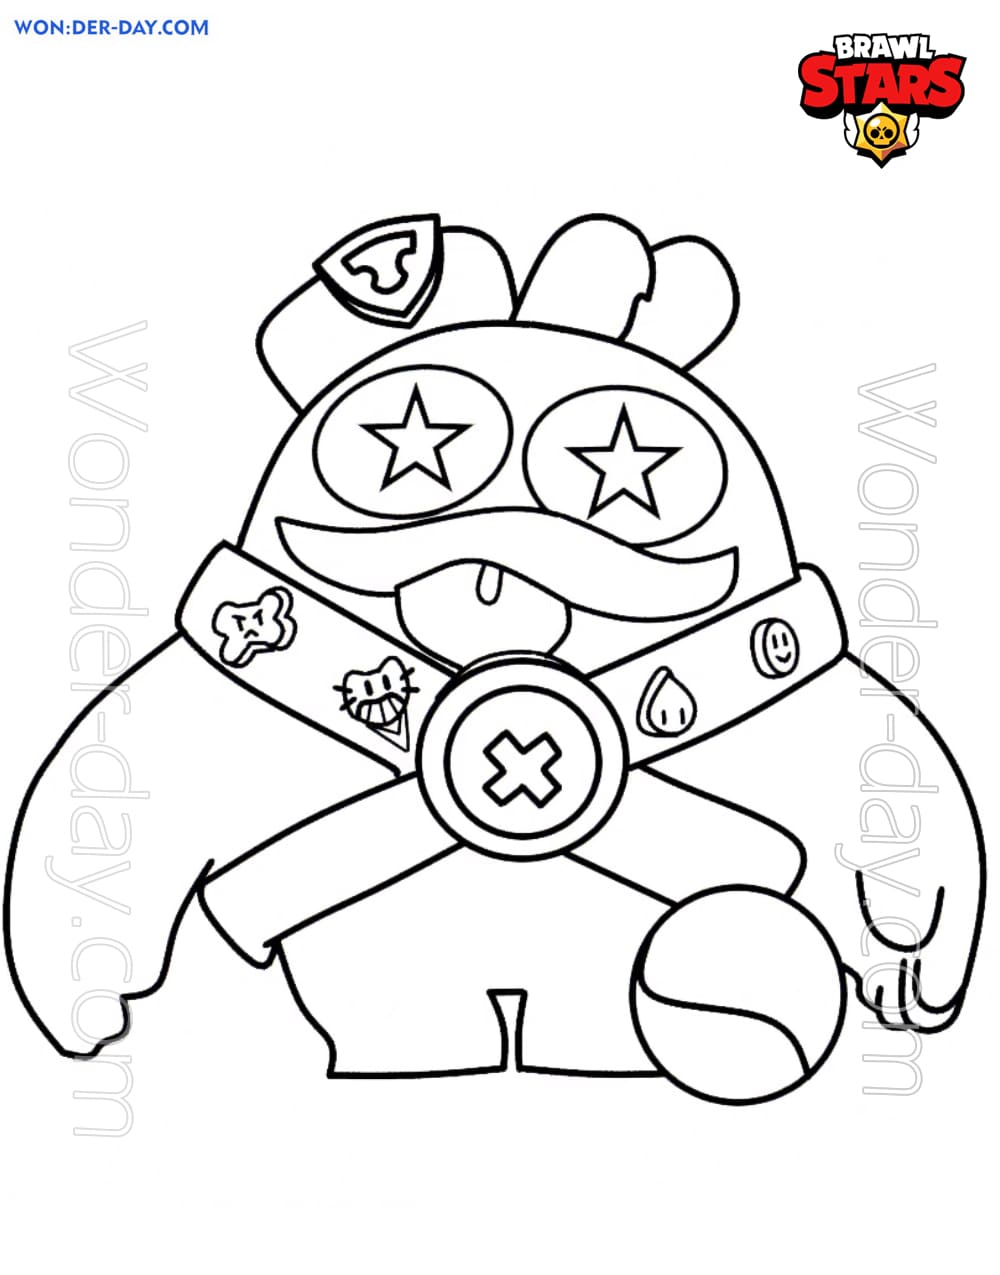 Squeak Brawl Stars Coloring Pages Wonder Day Coloring Pages For Children And Adults - how to draw squeak from brawl stars